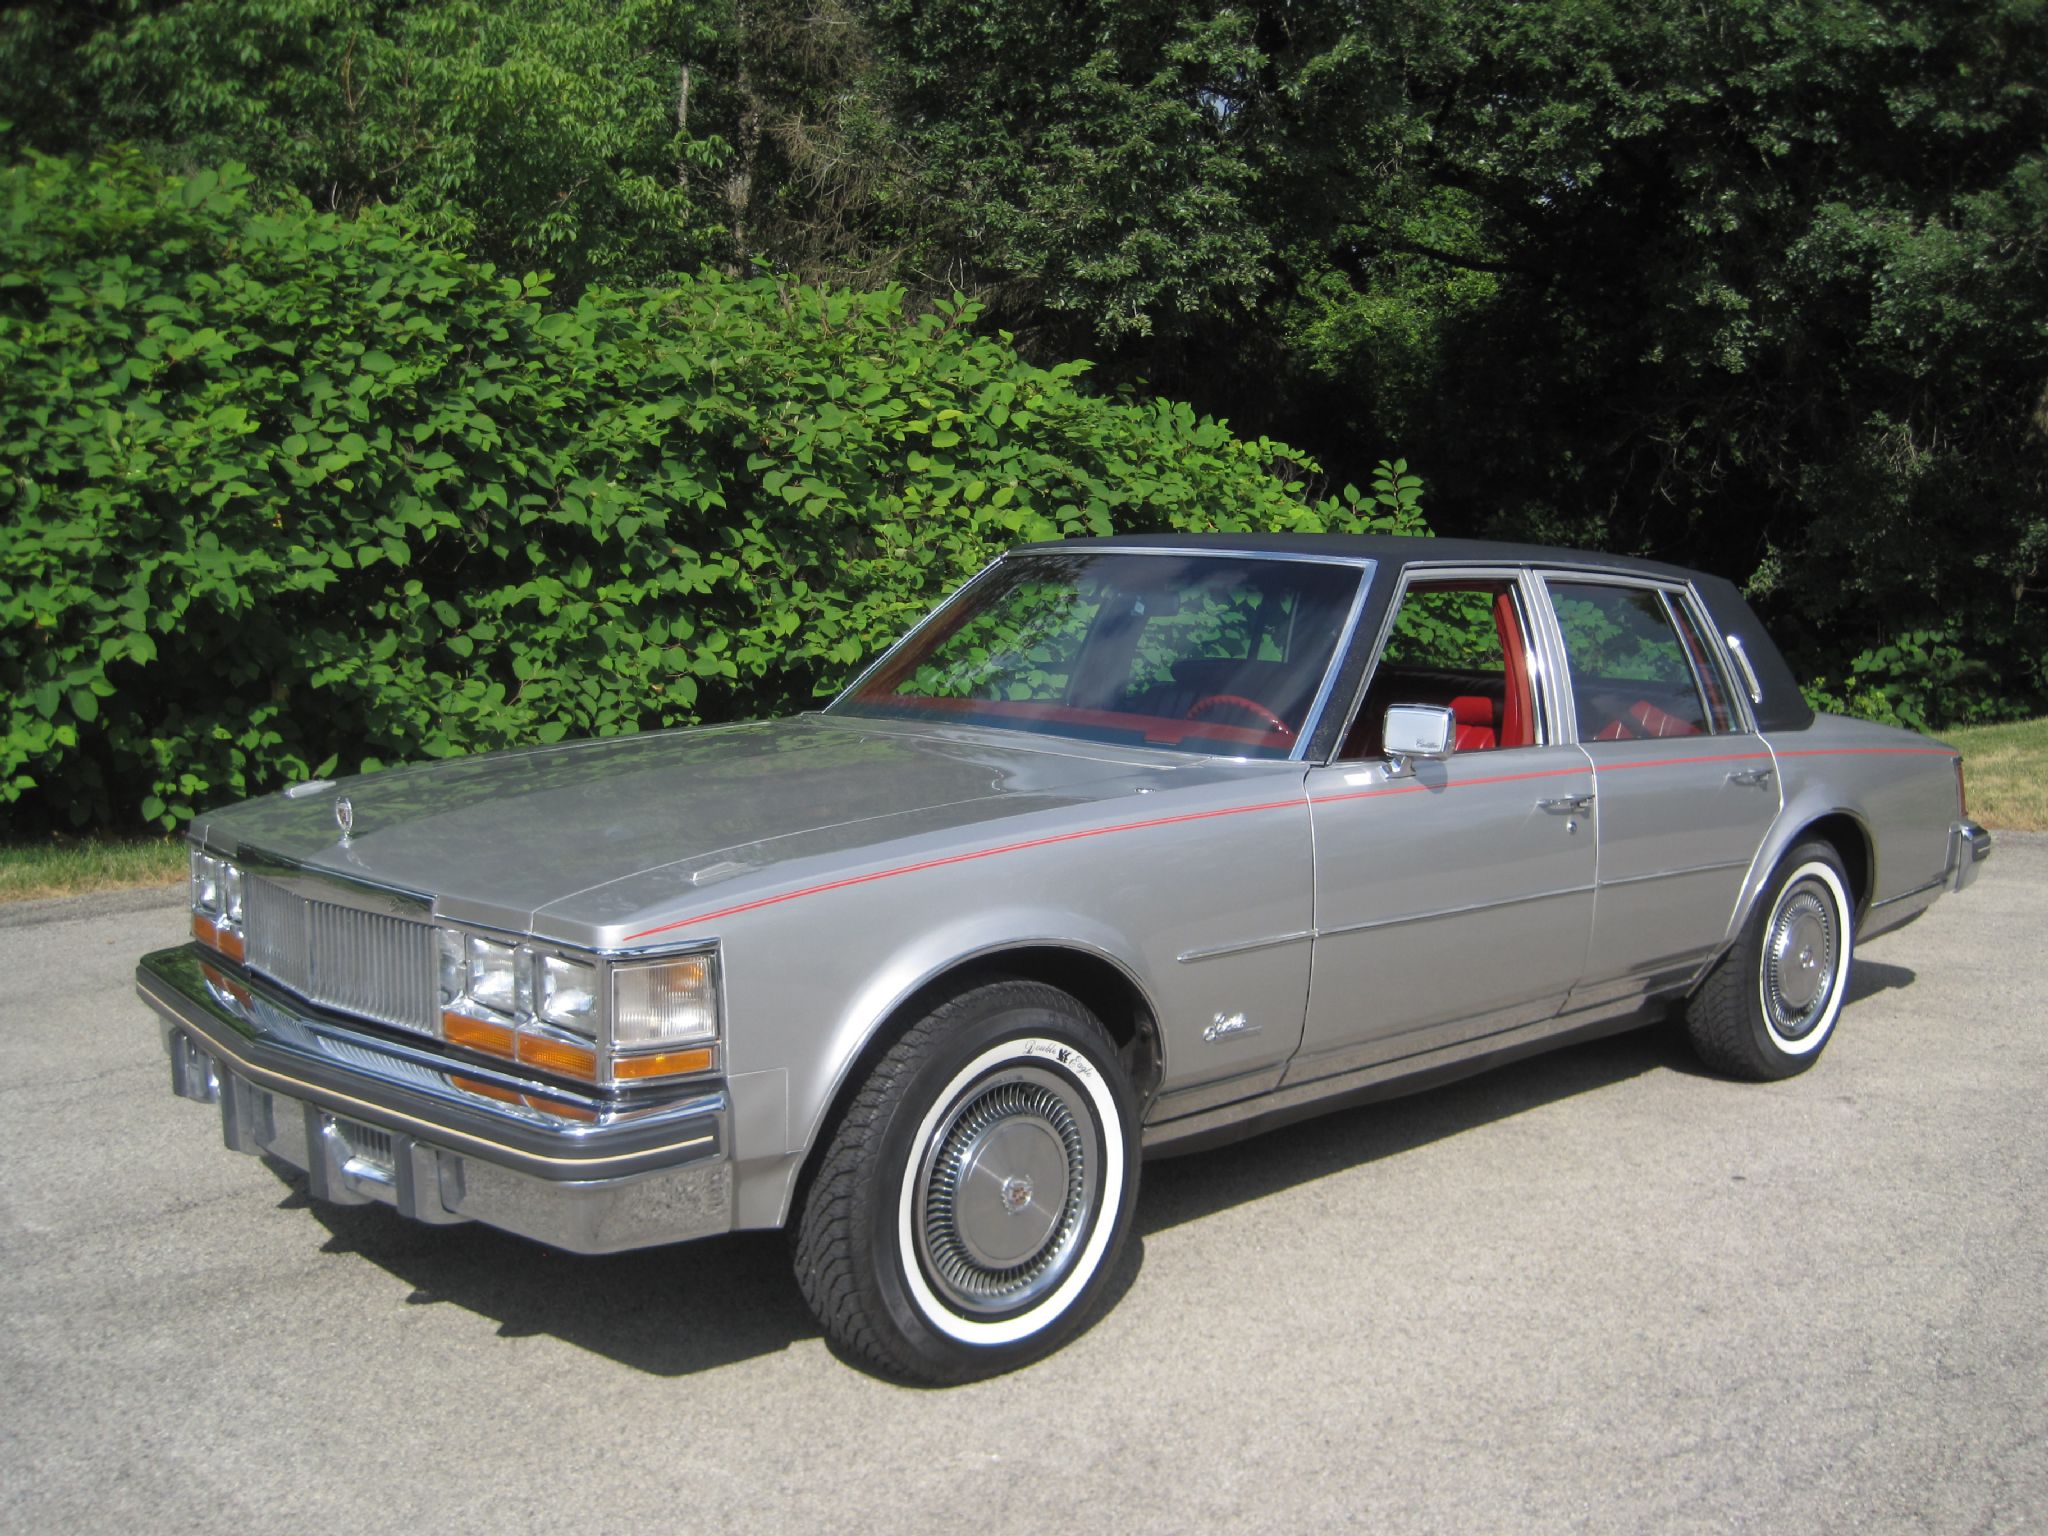  Cadillac Seville - None Finer - Immaculate IN And Out-